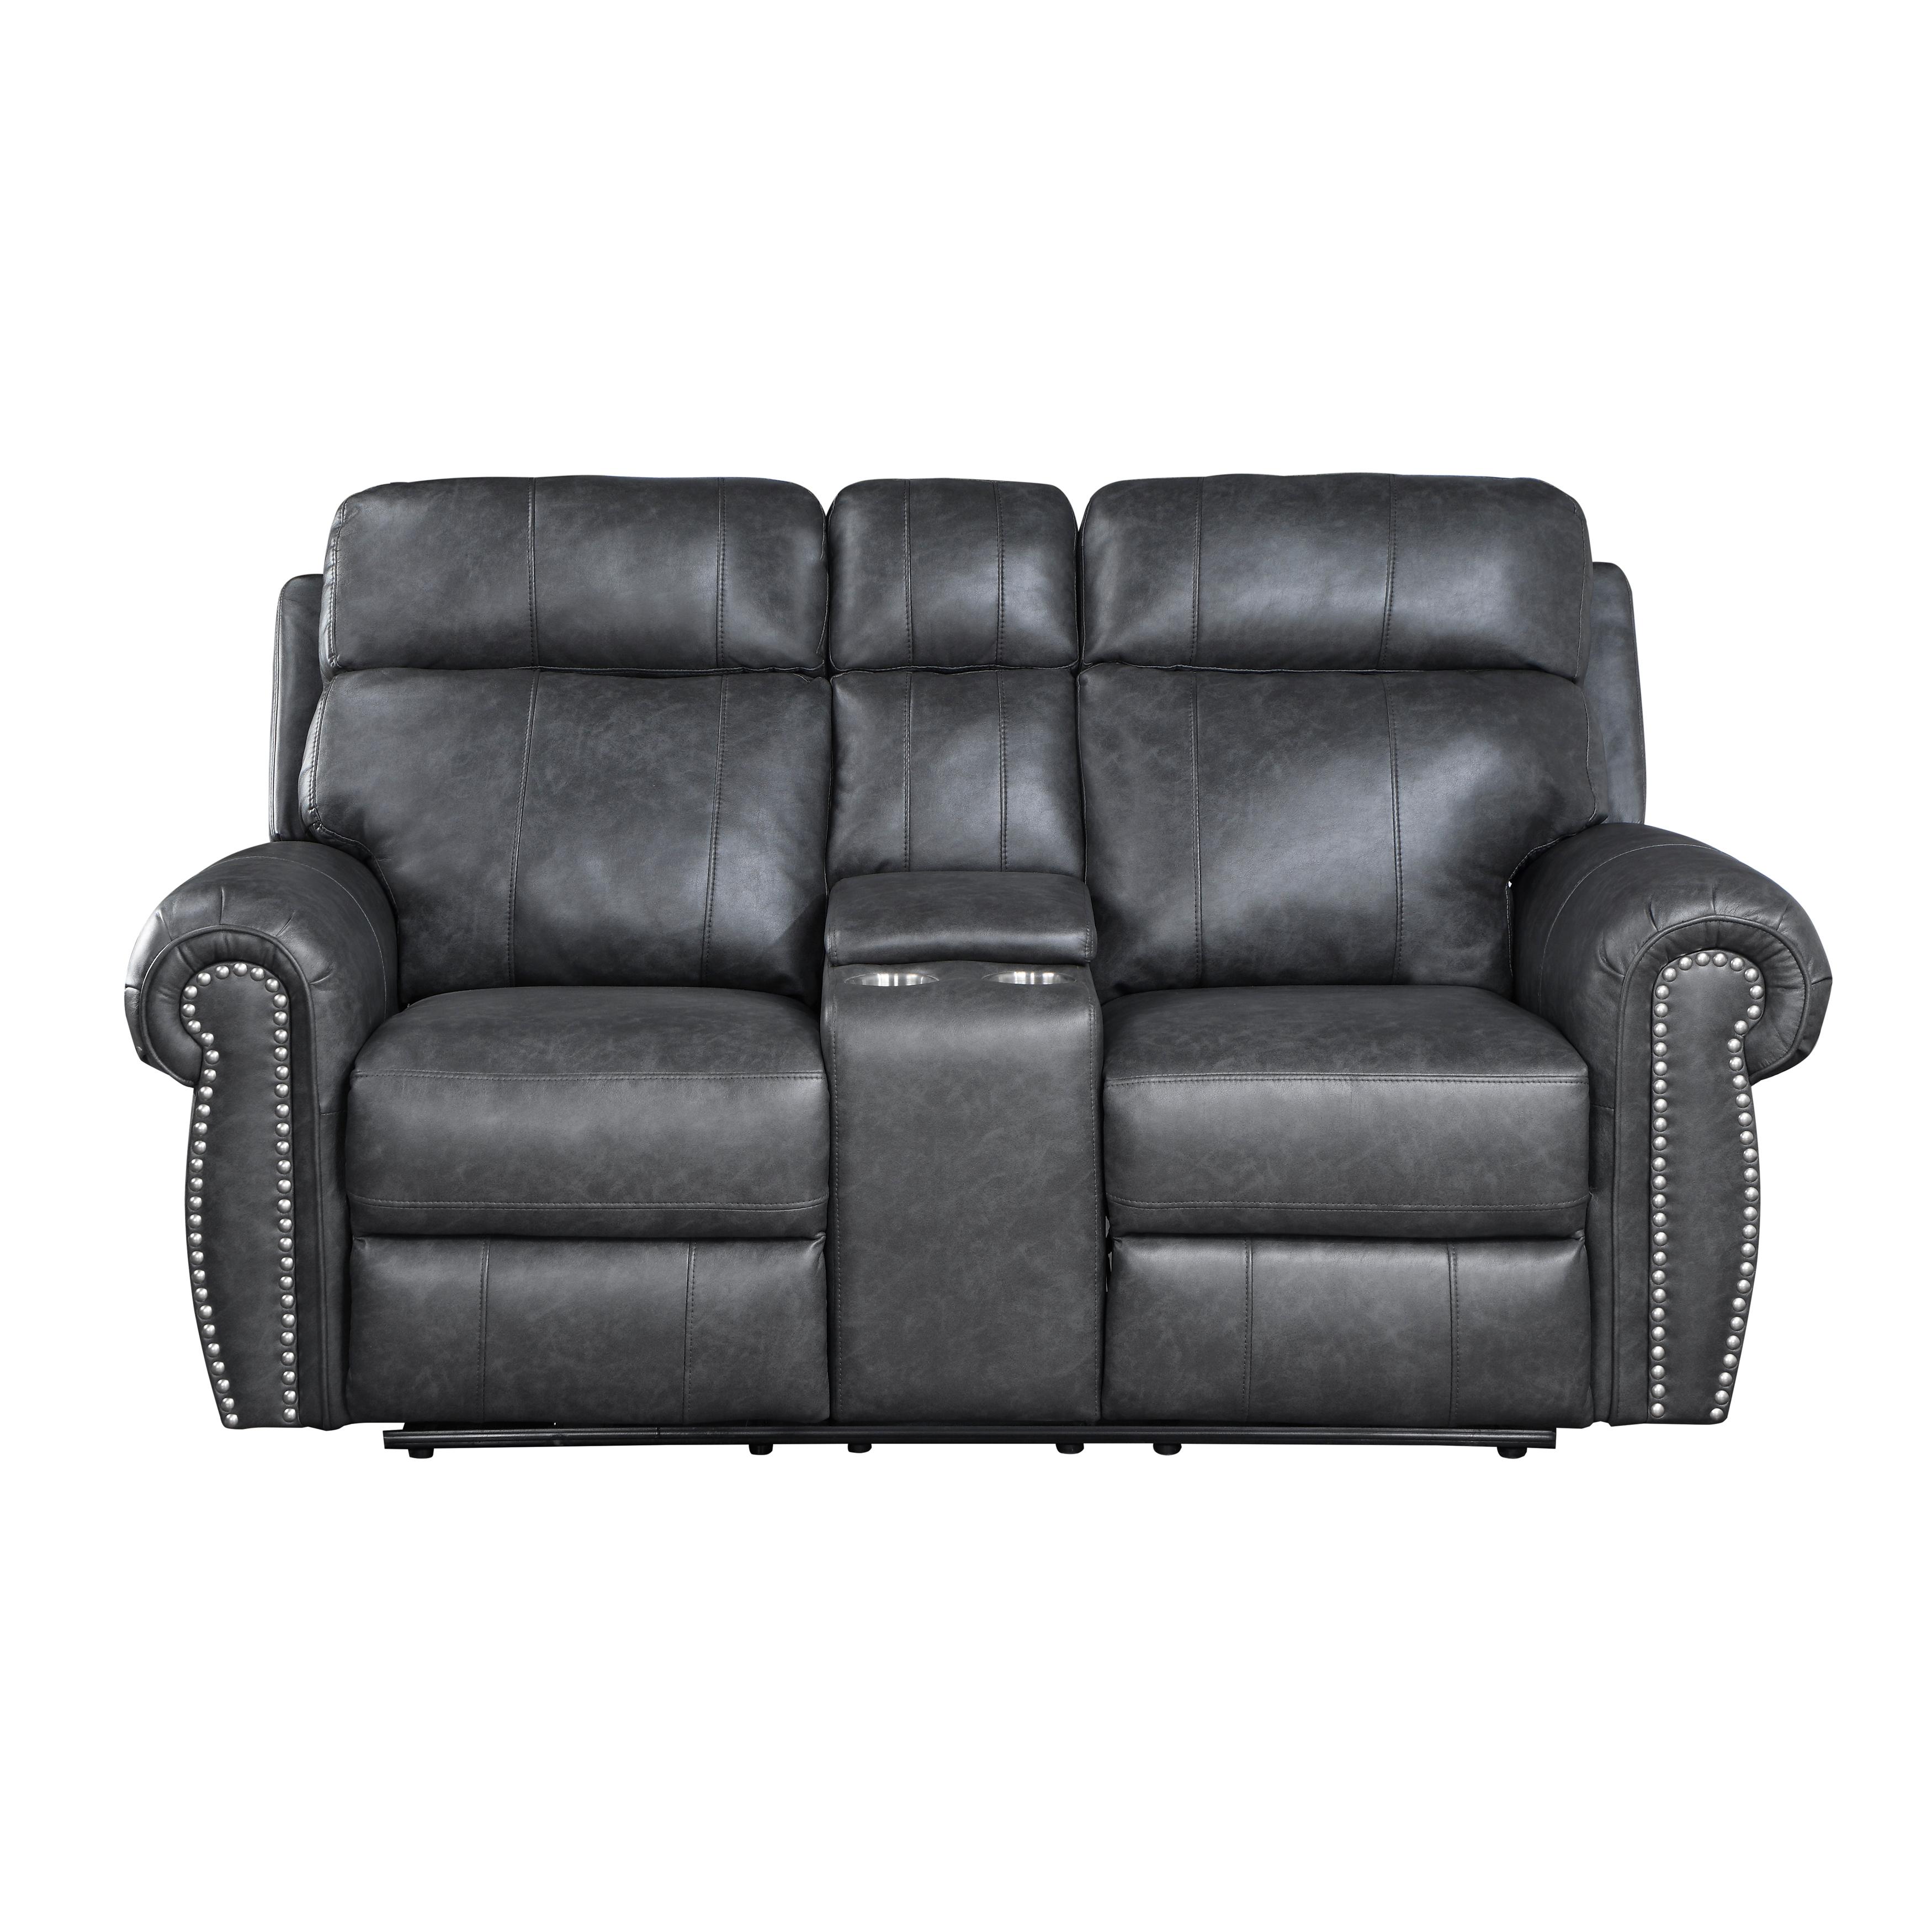 Transitional Power Reclining Loveseat 9488GY-2PW Granville 9488GY-2PW in Gray Suede